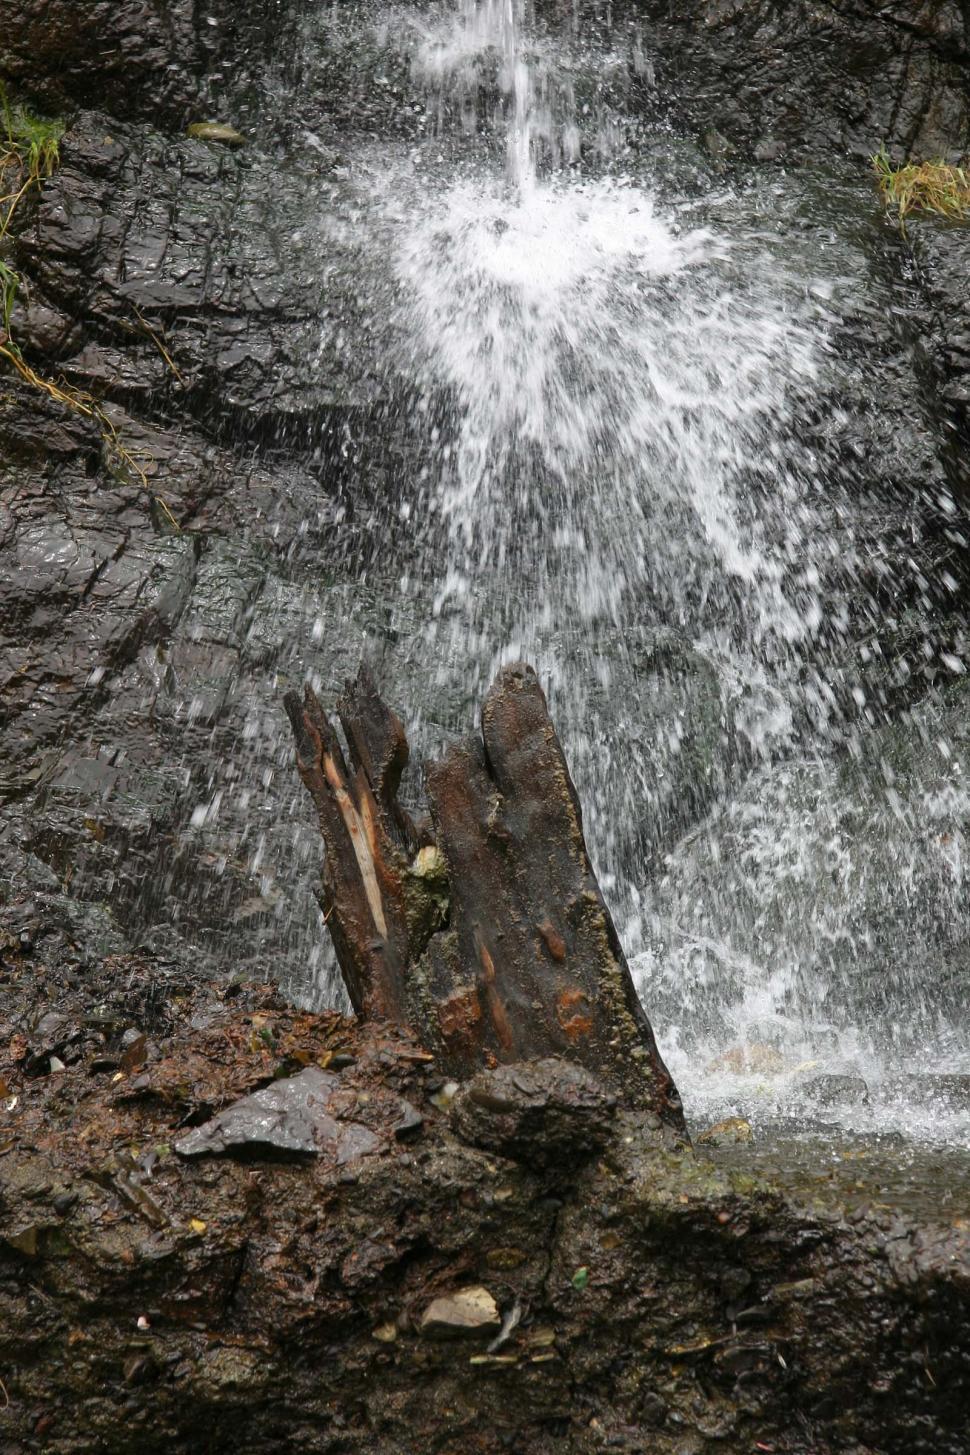 Free Image of Fire Hydrant Spewing Water in Small Waterfall 